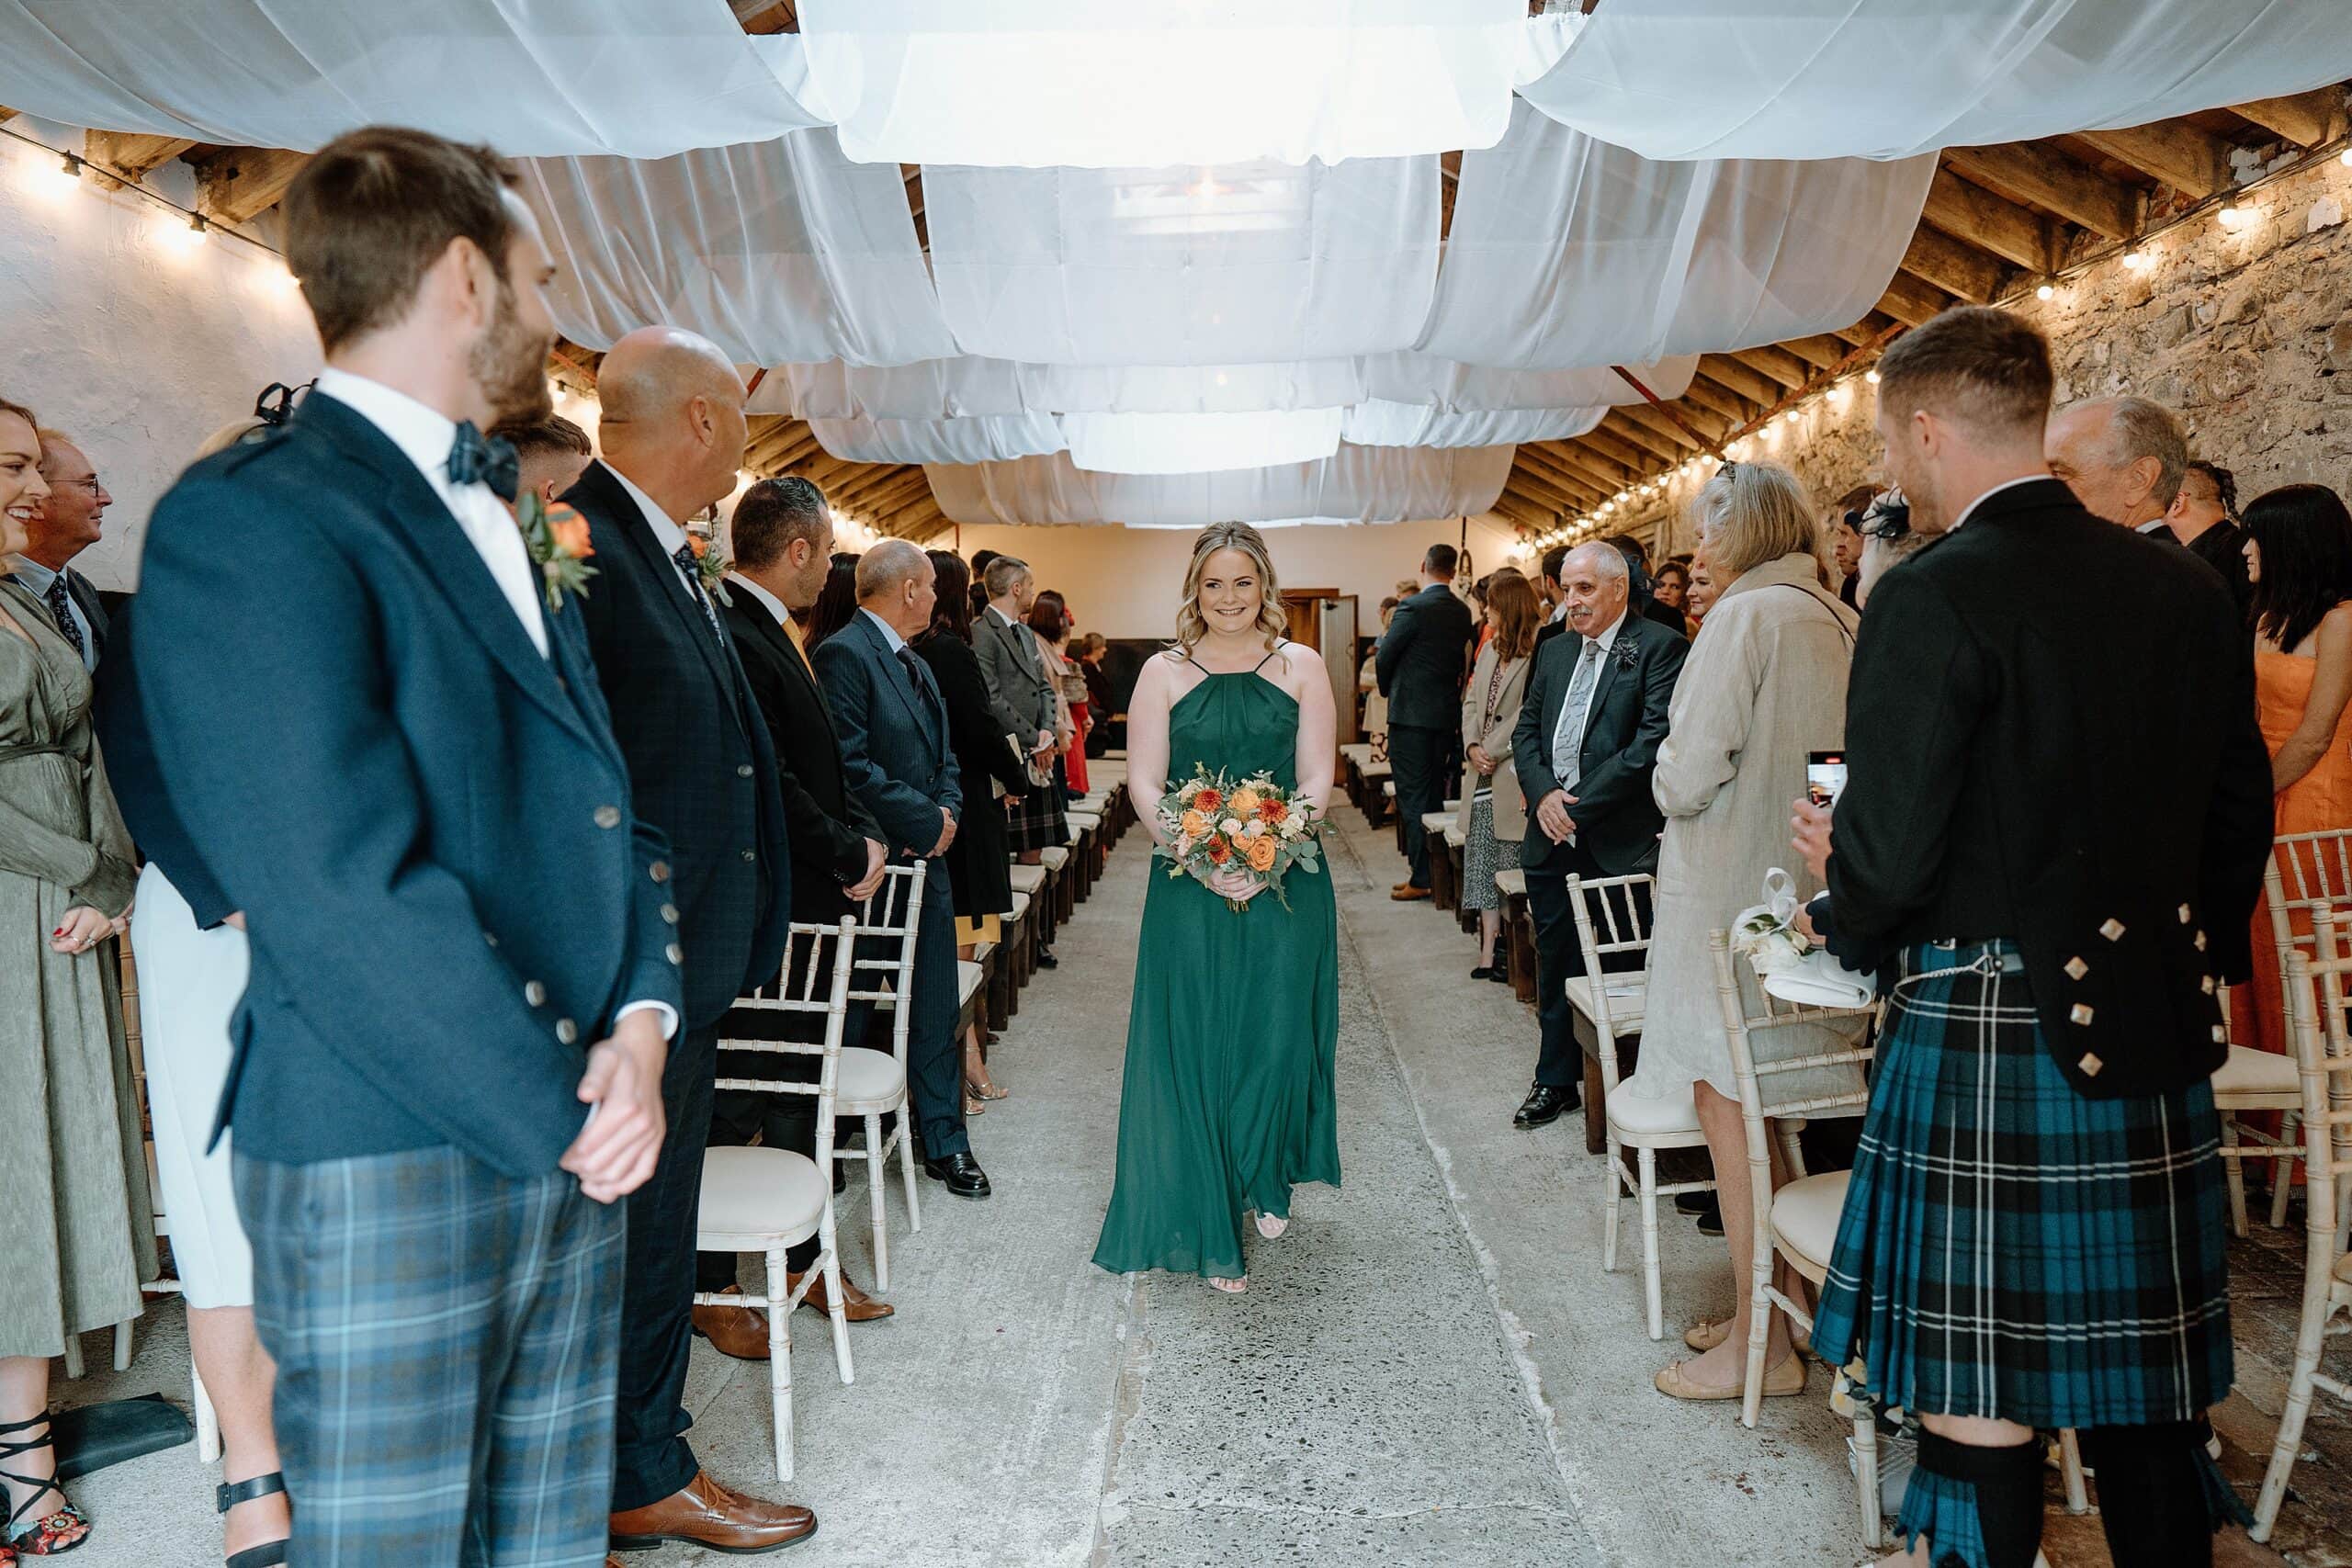 bridesmaid walks up the aisle beneath white drapes hanging from the ceiling inside the wedding byre at harelaw farm wedding barn venue fenwick scotland